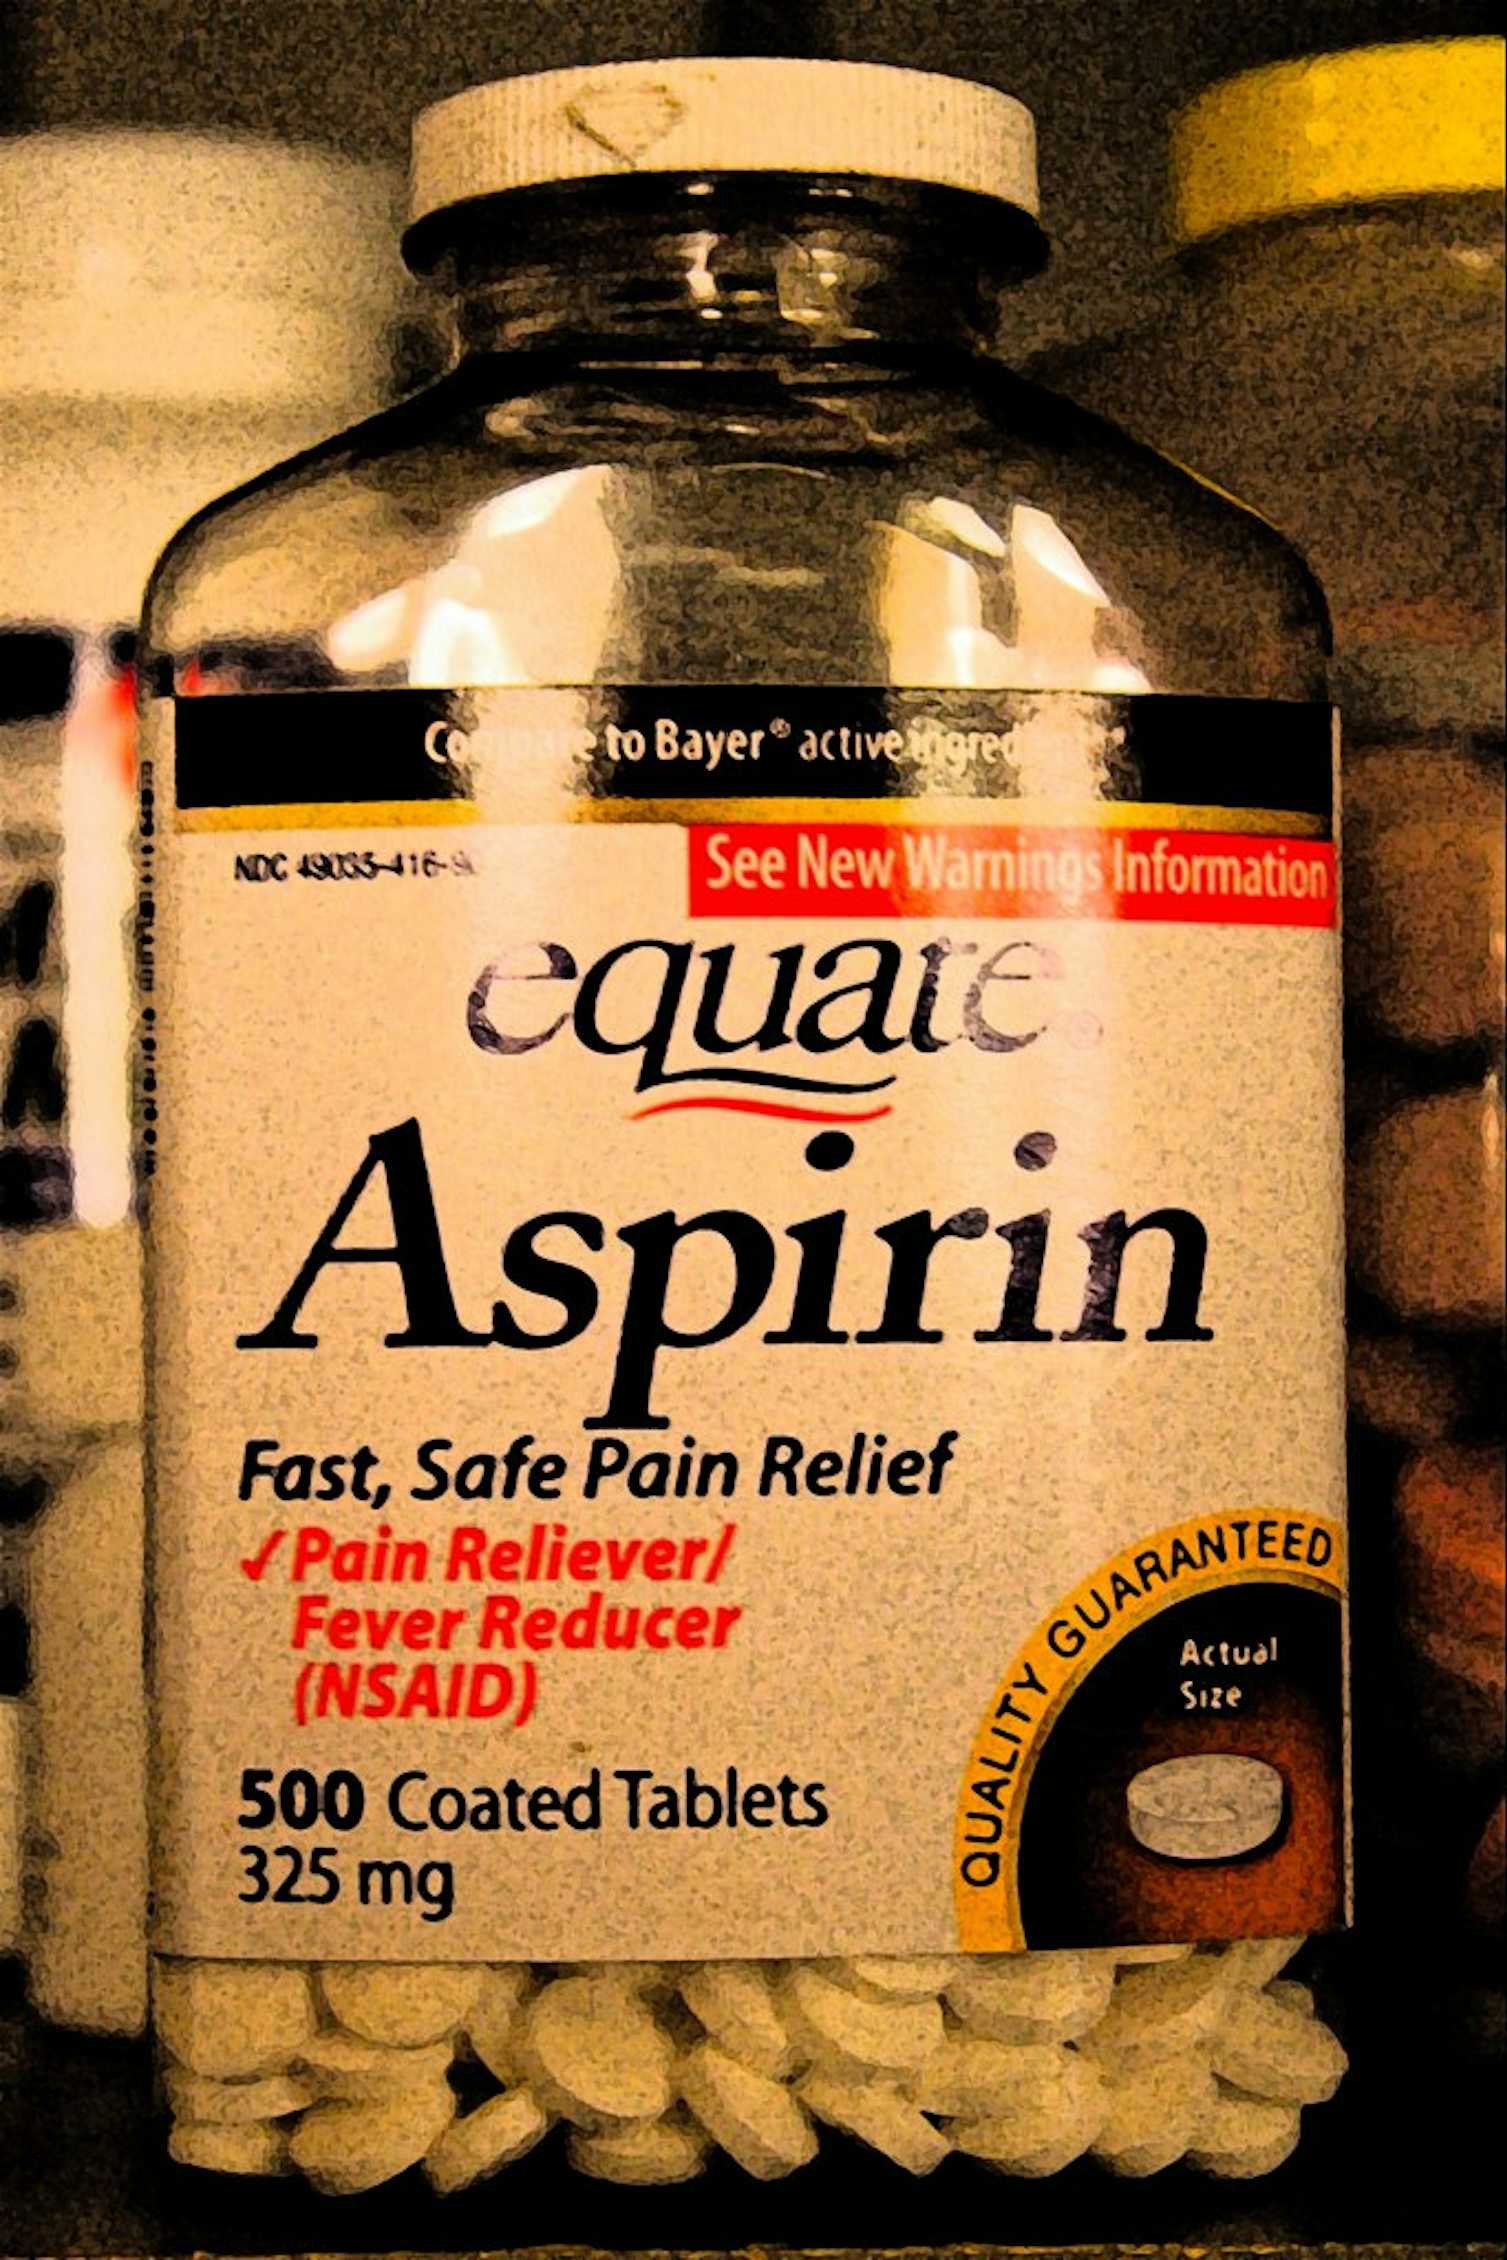 Aspirin and other household drugs help restrict supply lines of cancer